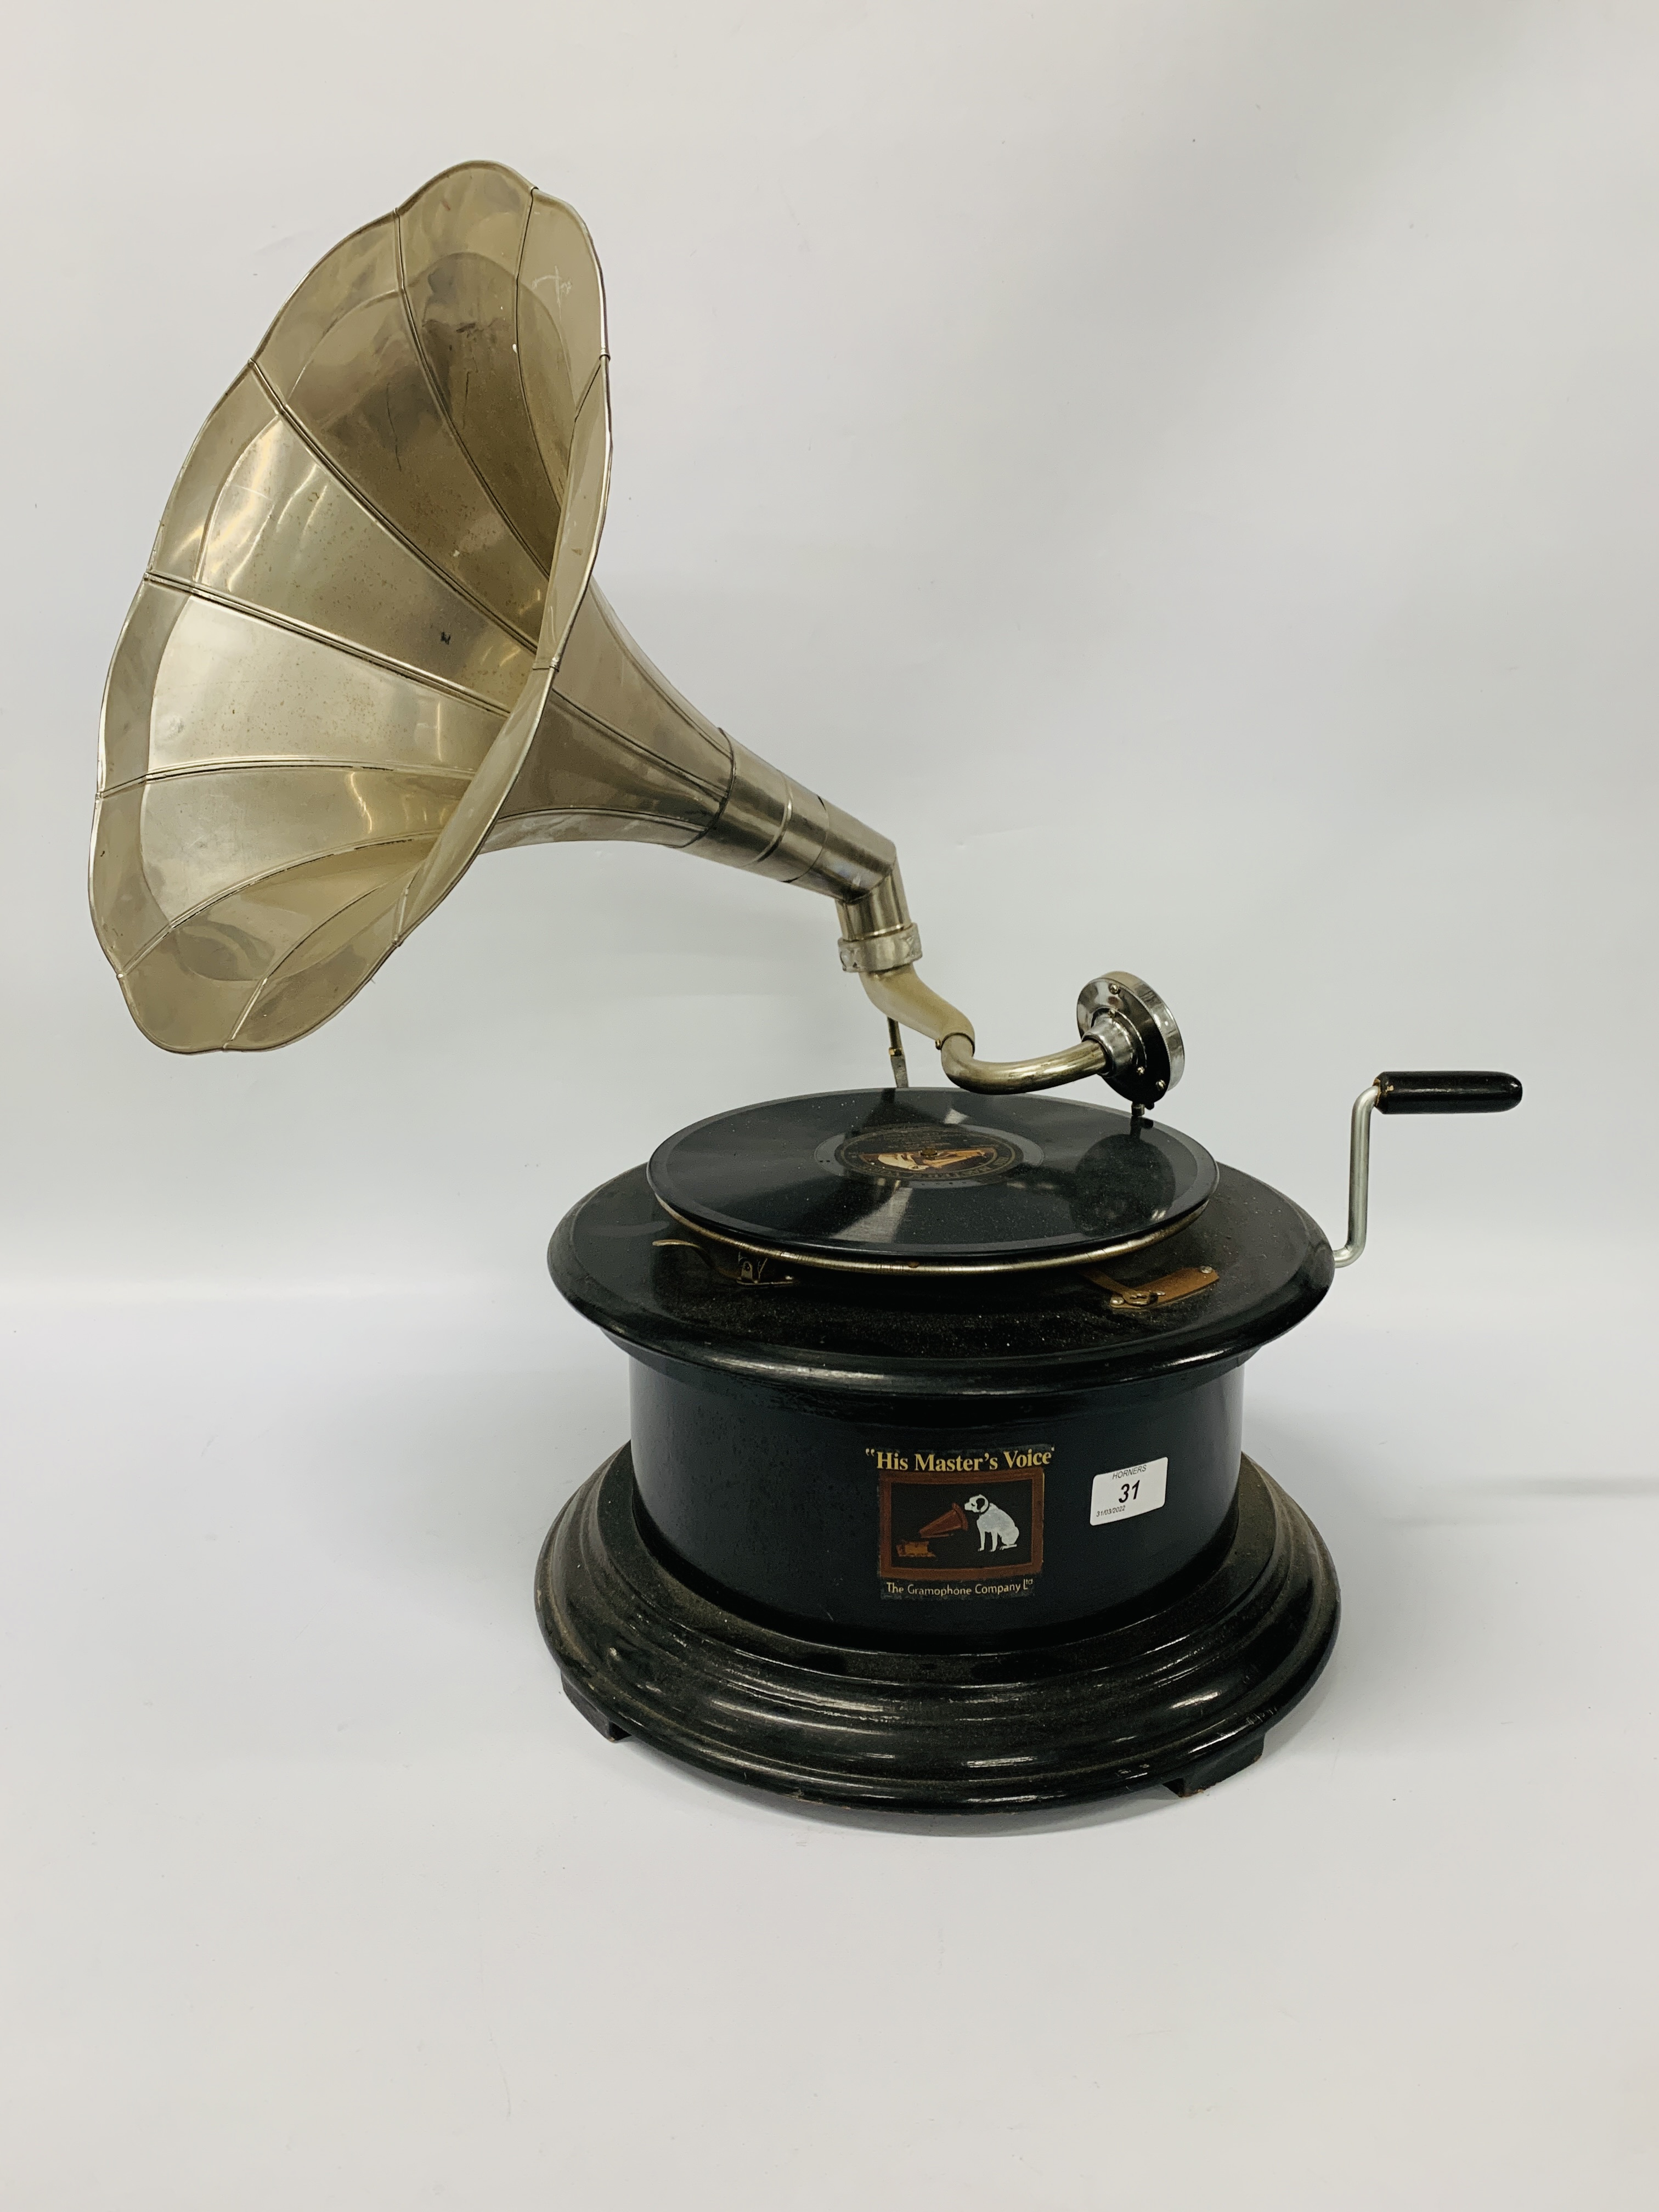 A TABLE TOP WIND UP HORN GRAMOPHONE MARKED "HIS MASTERS VOICE"